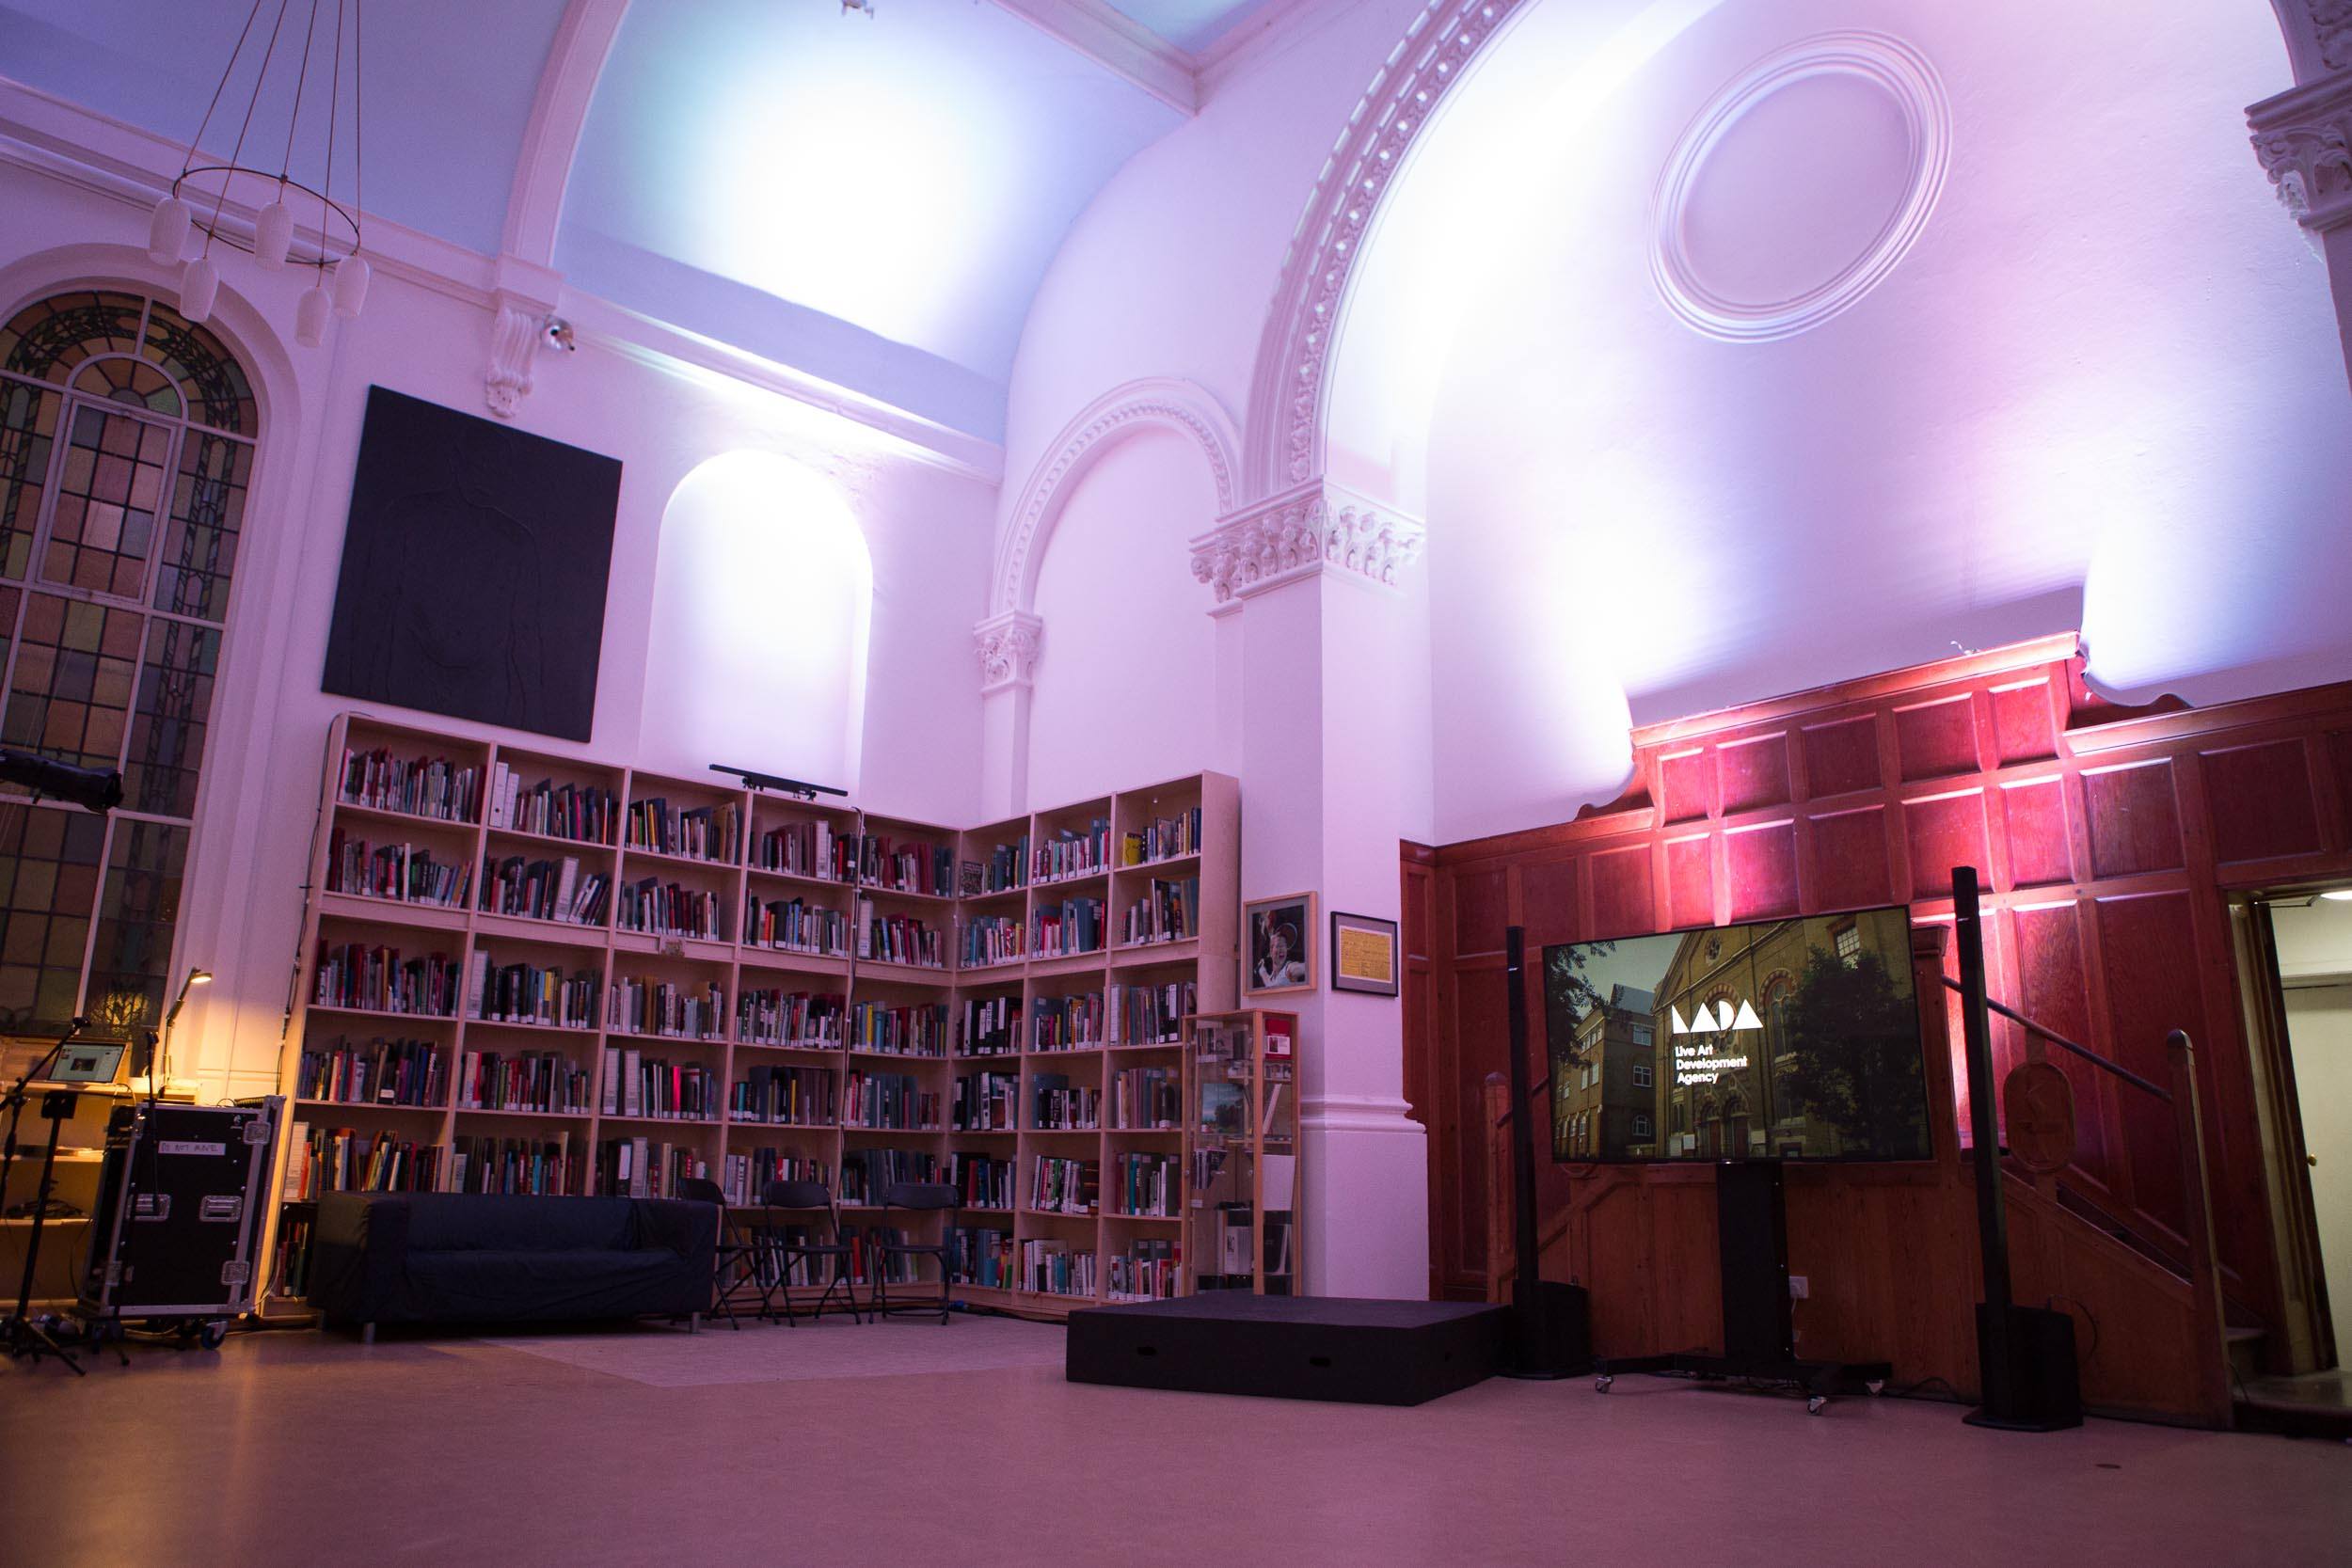 A low angle photograph of LADA's study room. The room has high ceilings and white walls. There are tall bookcases lining the walls and a large monitor displaying LADA's logo. The room is bathed in a pinkish light